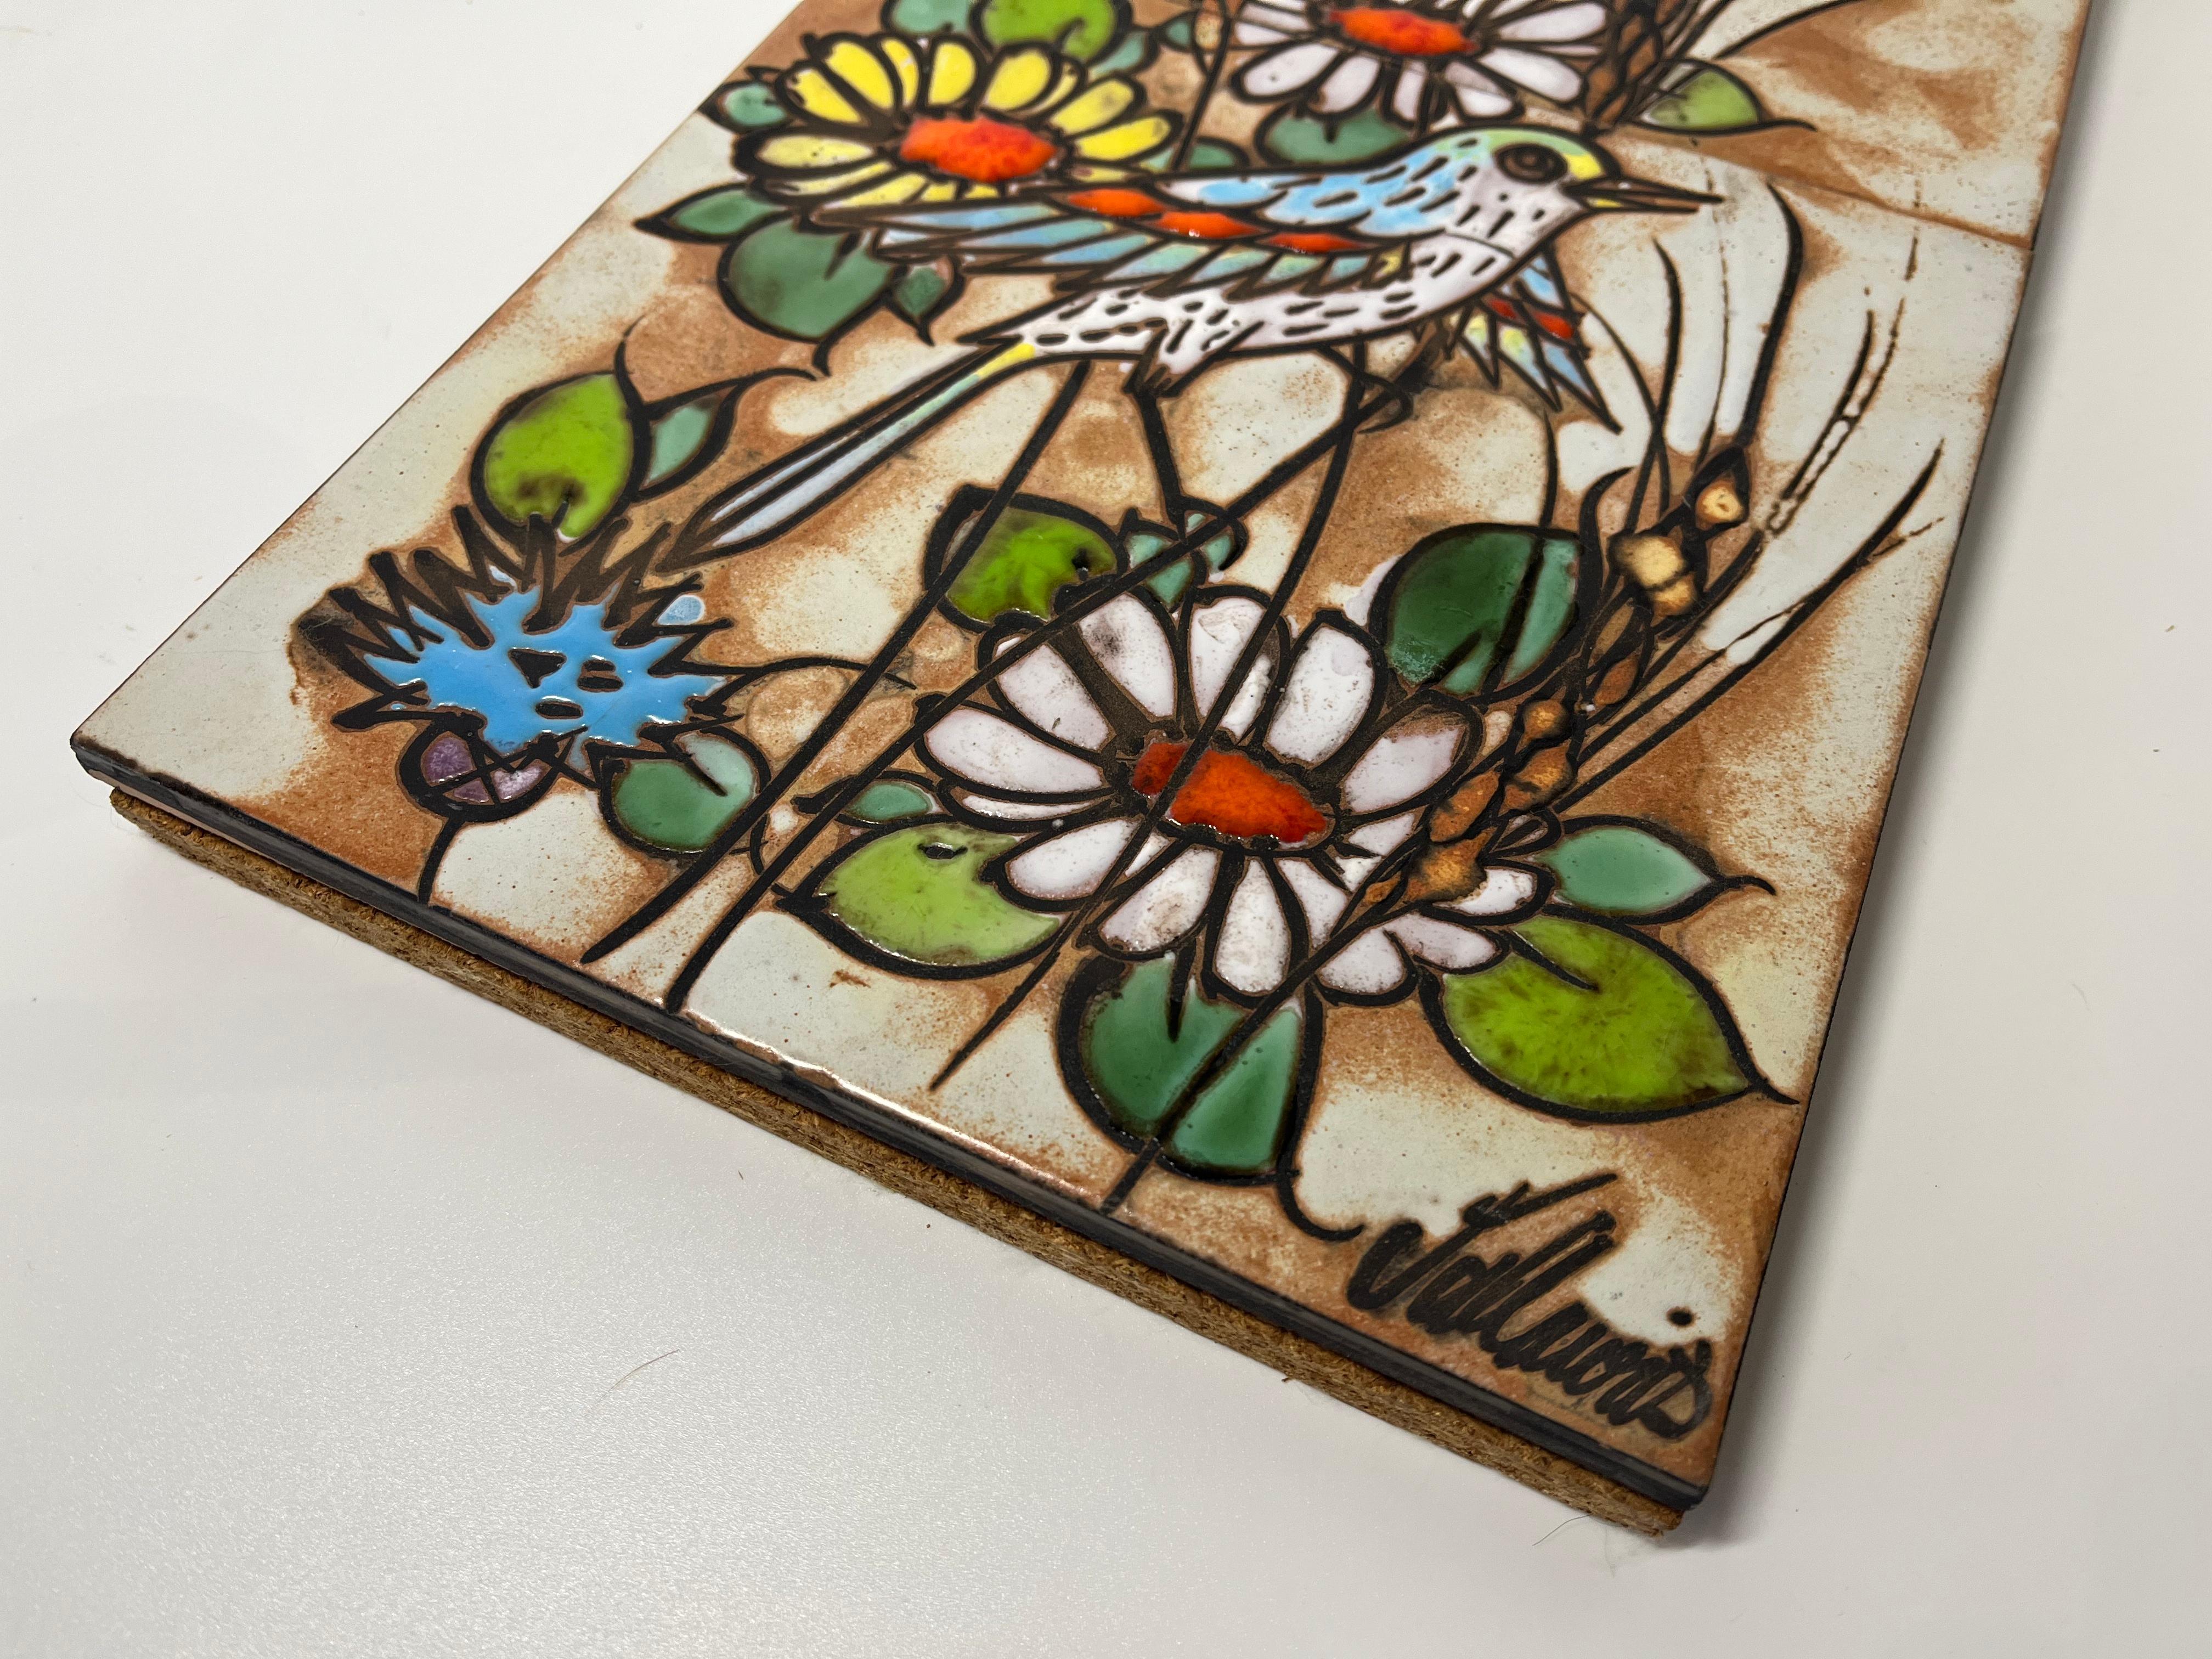 French Songbird and Daisies Vallauris Glazed Ceramic Tiles Enamel Wall Decoration c1960 For Sale